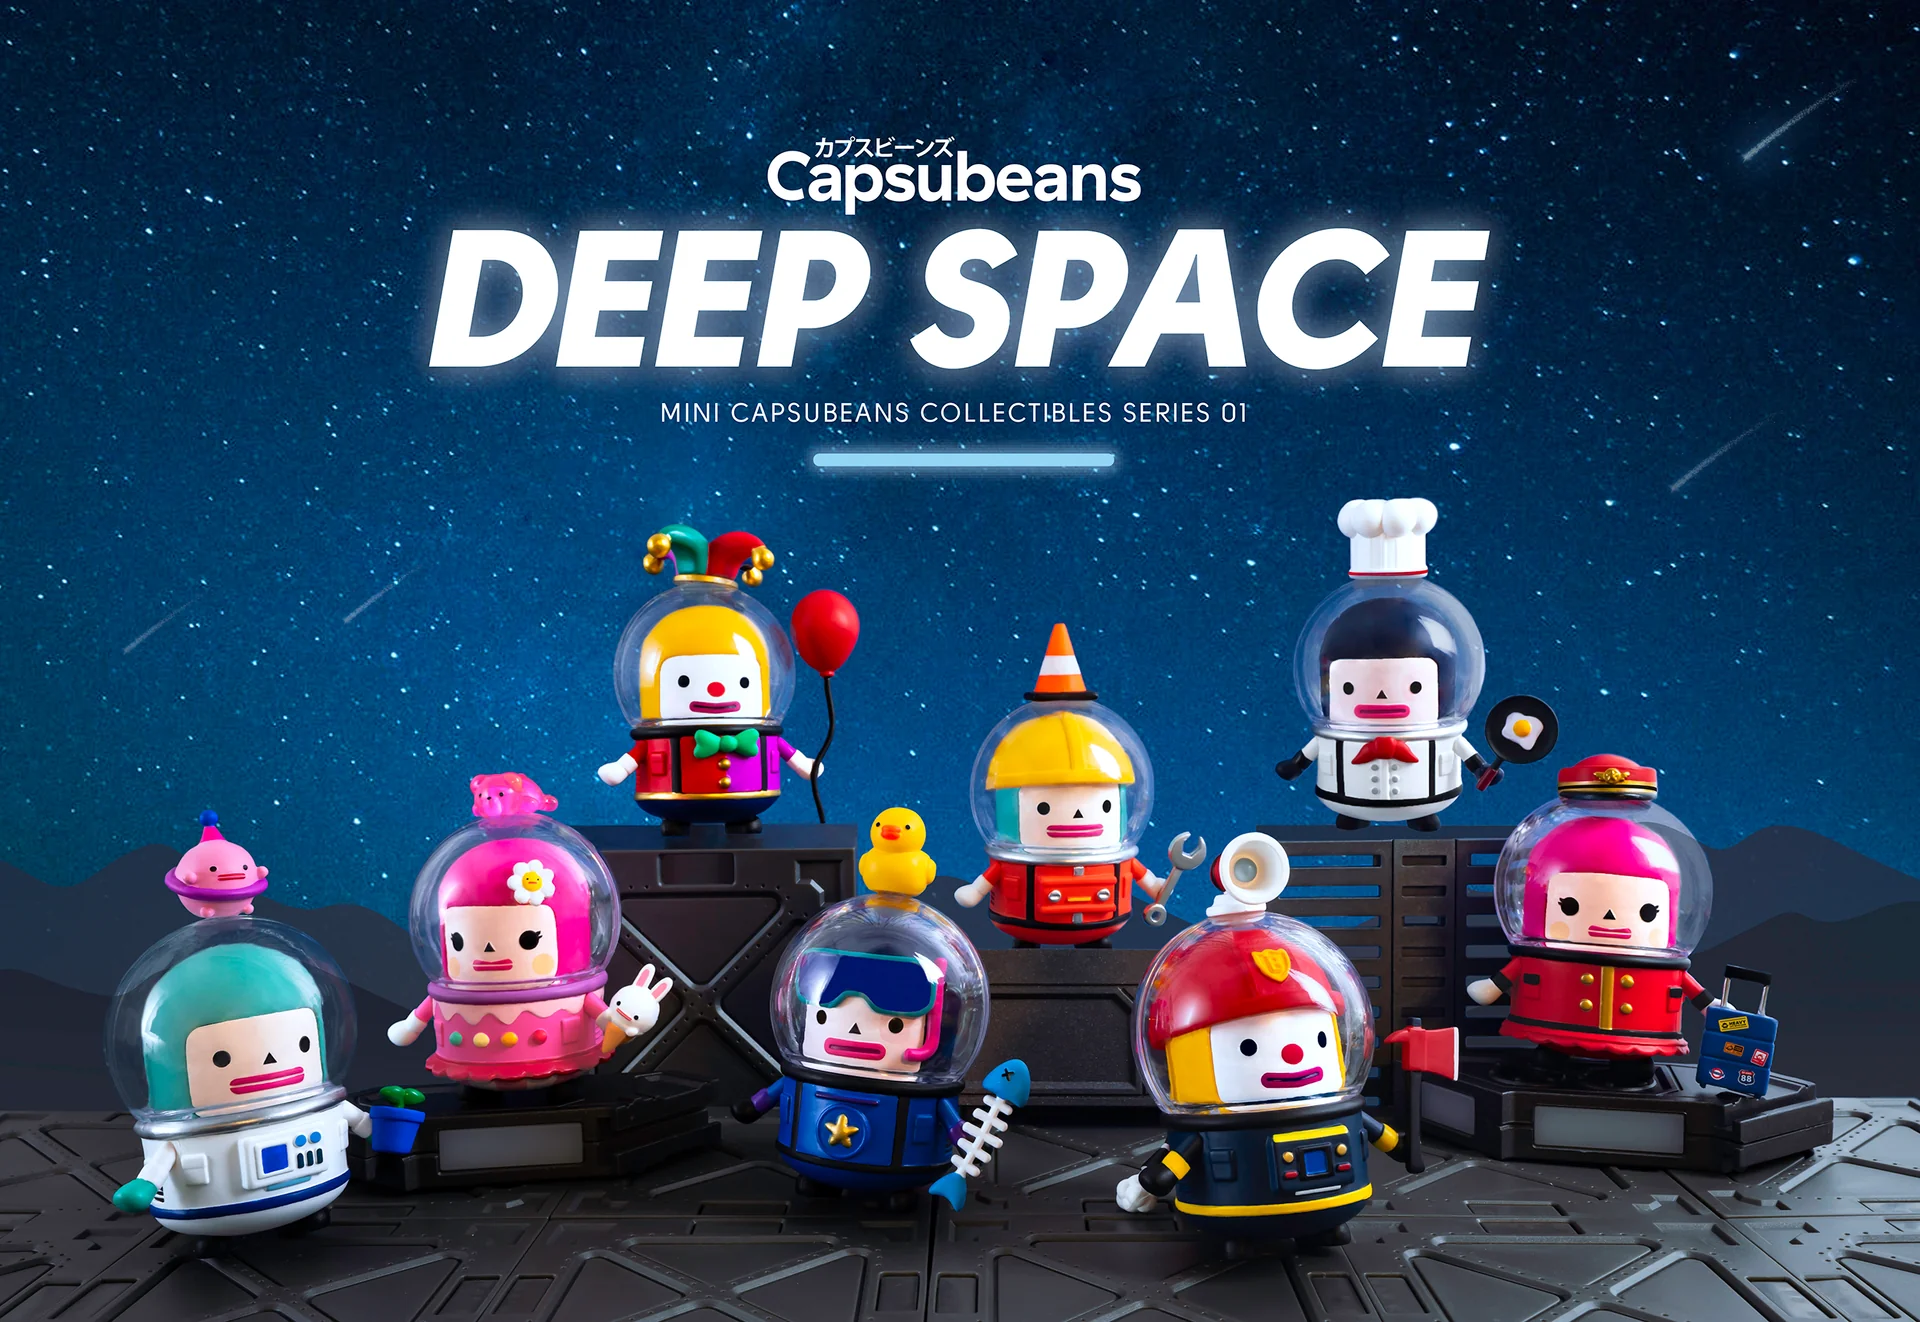 CAPSUBEANS DEEP SPACE MINI FIGURE COLLECTIBLE SERIES